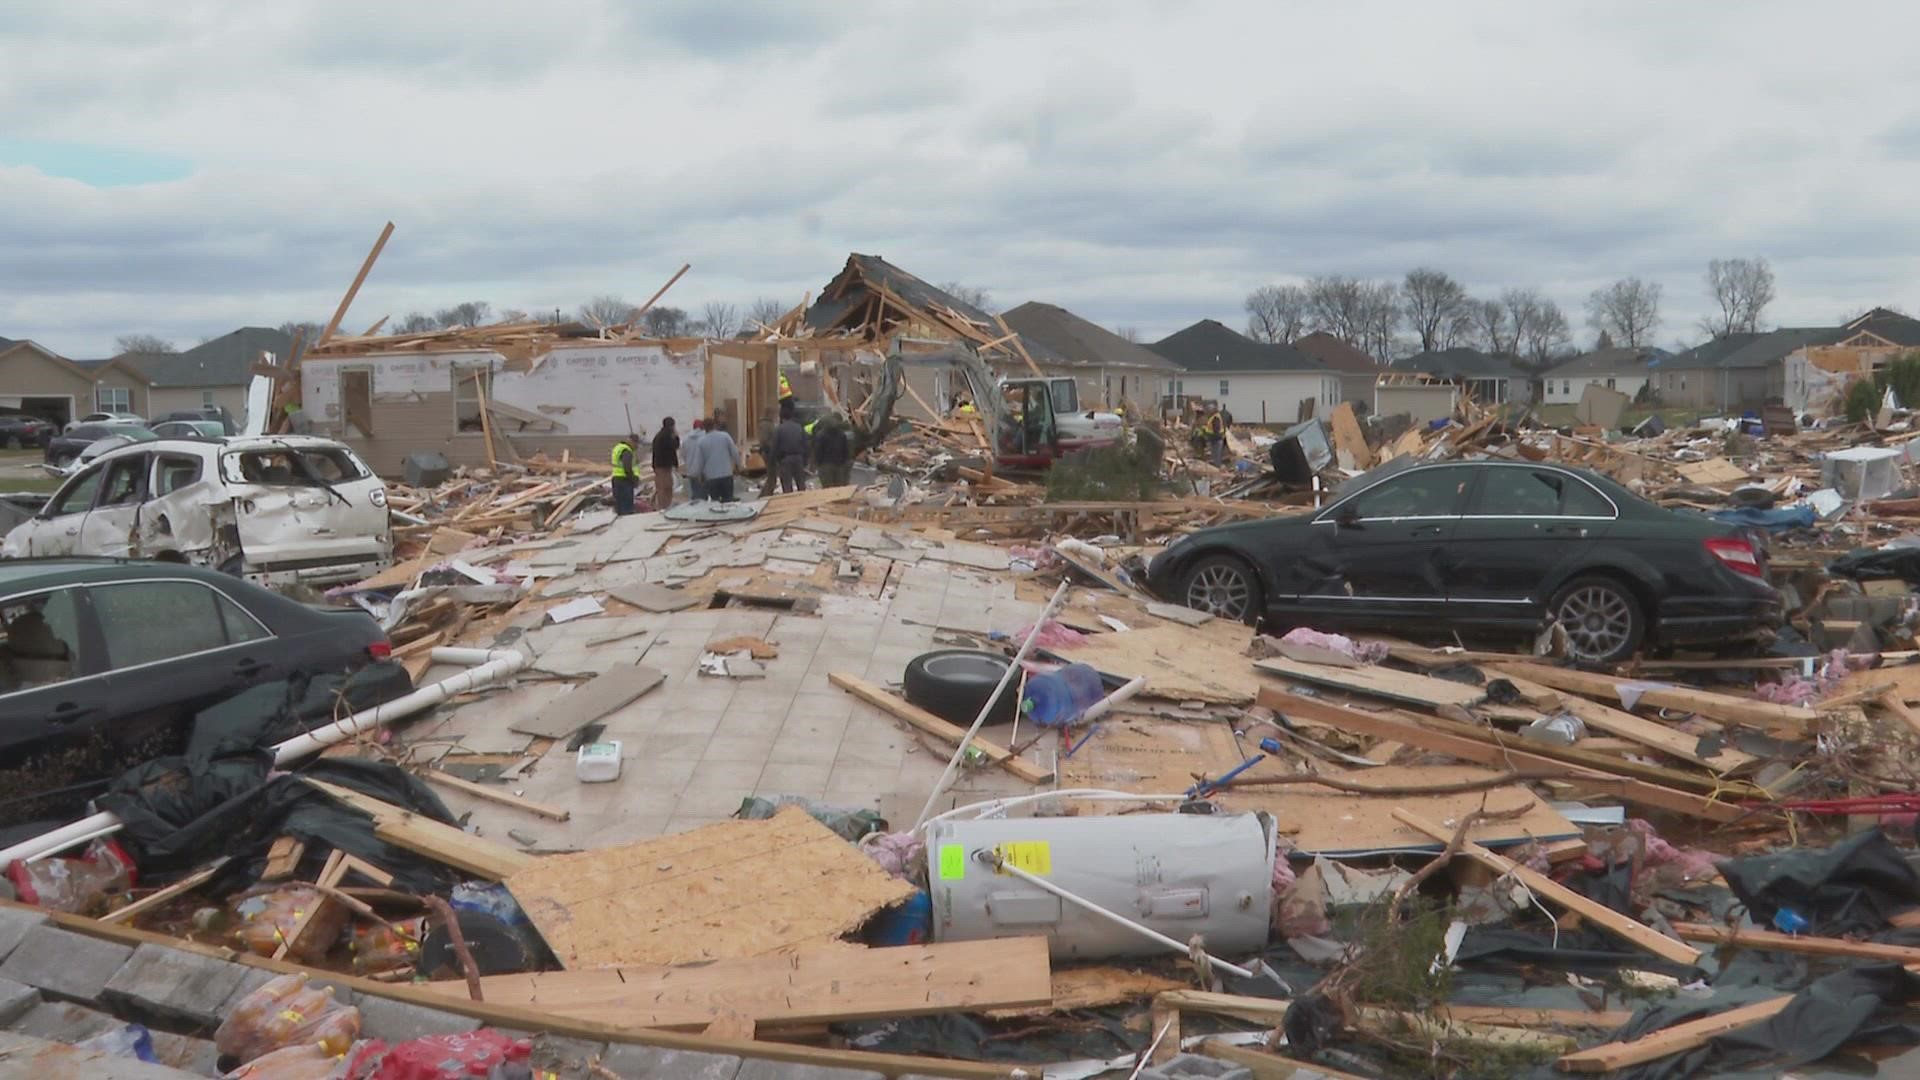 Western Kentucky residents had one plea in the days after the devastating tornadoes: Don't forget us.